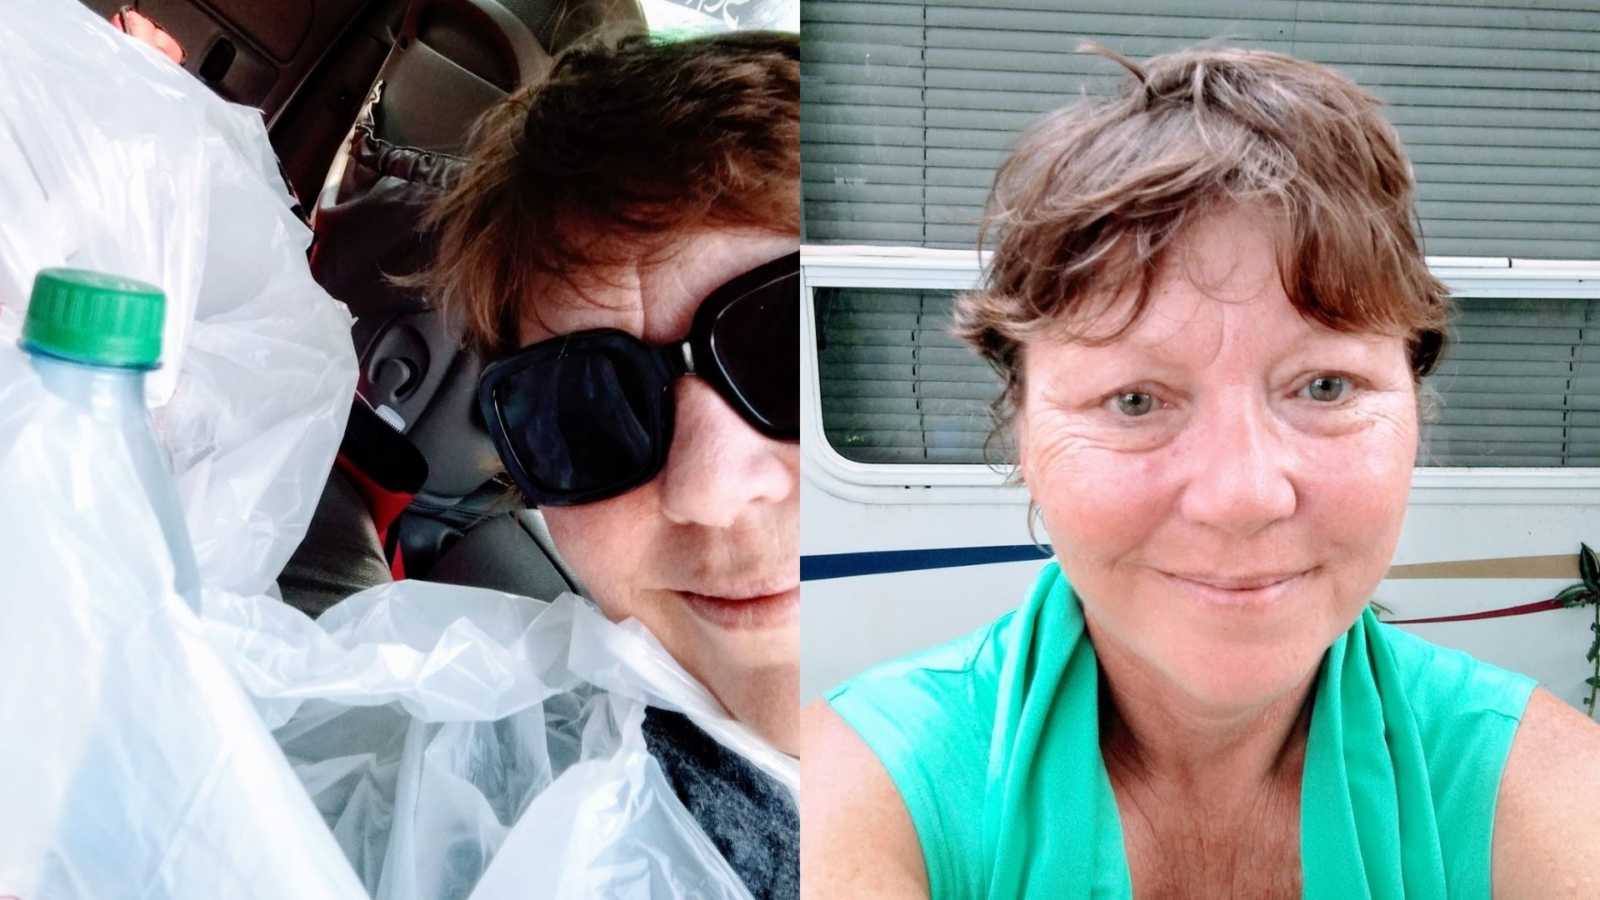 Woman shares selfies after touching act of kindness and 'revolution' in honor of homeless man